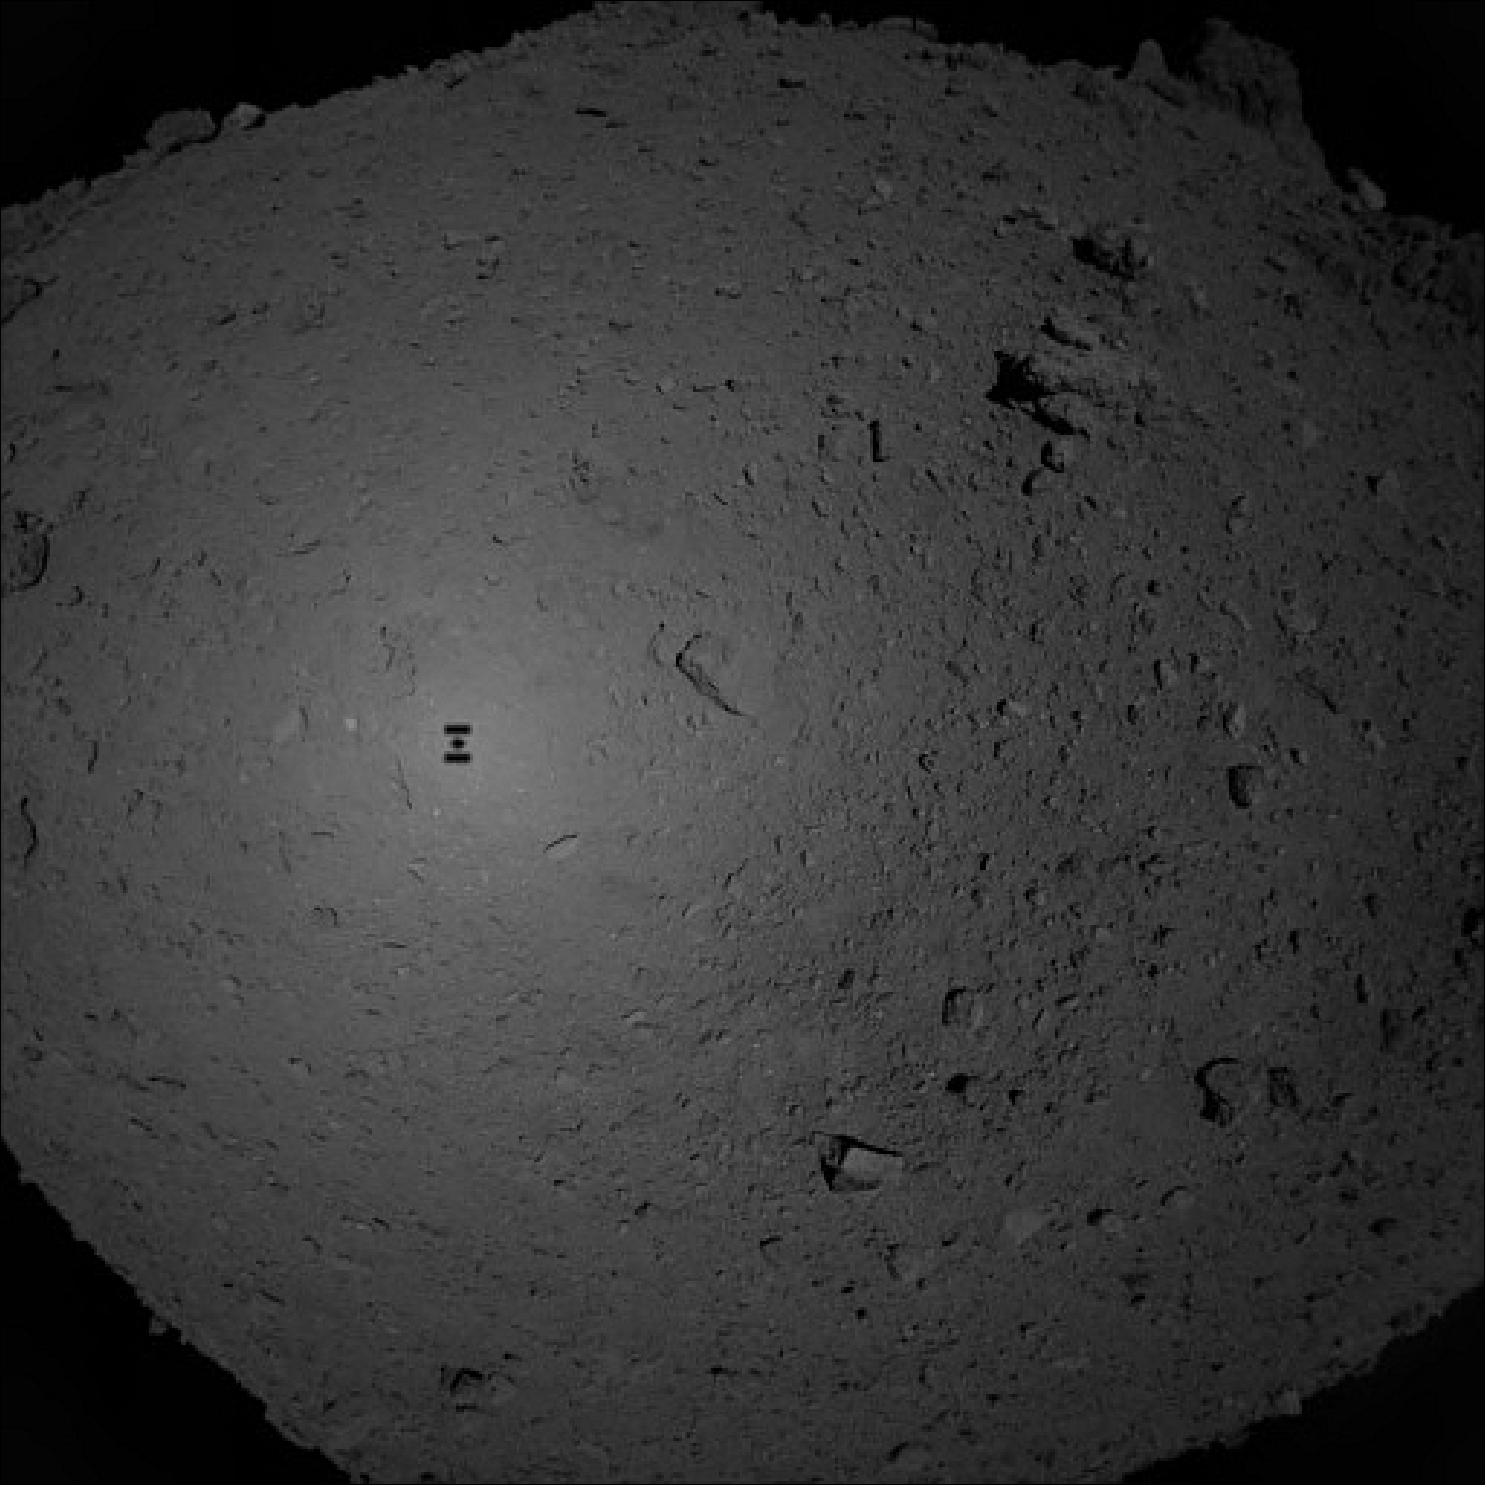 Figure 64: Hayabusa-2 photo of Ryugu during sampling descent. Hayabusa-2 took this photo with its optical navigation camera at an altitude of about 180 meters, before it entered its final descent to grab a sample from asteroid Ryugu, on 21 February 2019 (image credit: JAXA, University of Tokyo, Kochi University, Rikkyo University, Nagoya University, Chiba Institute of Technology, Meiji University, University of Aizu, AIST)